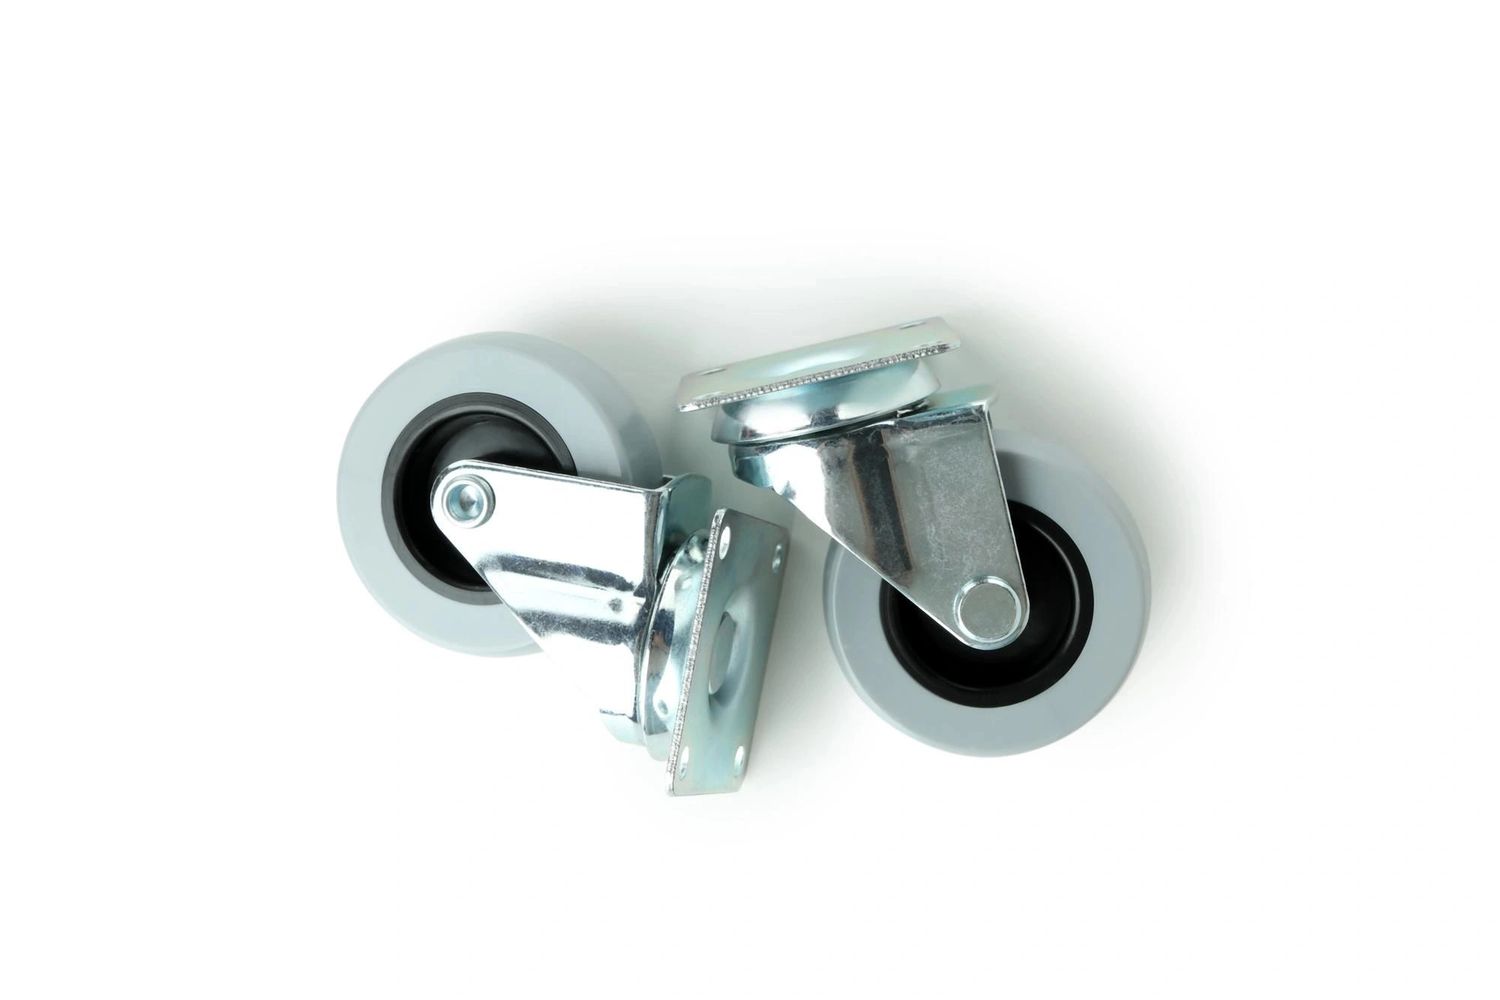 "Expertly designed and manufactured wheels and castors for your success" from GITE Industries